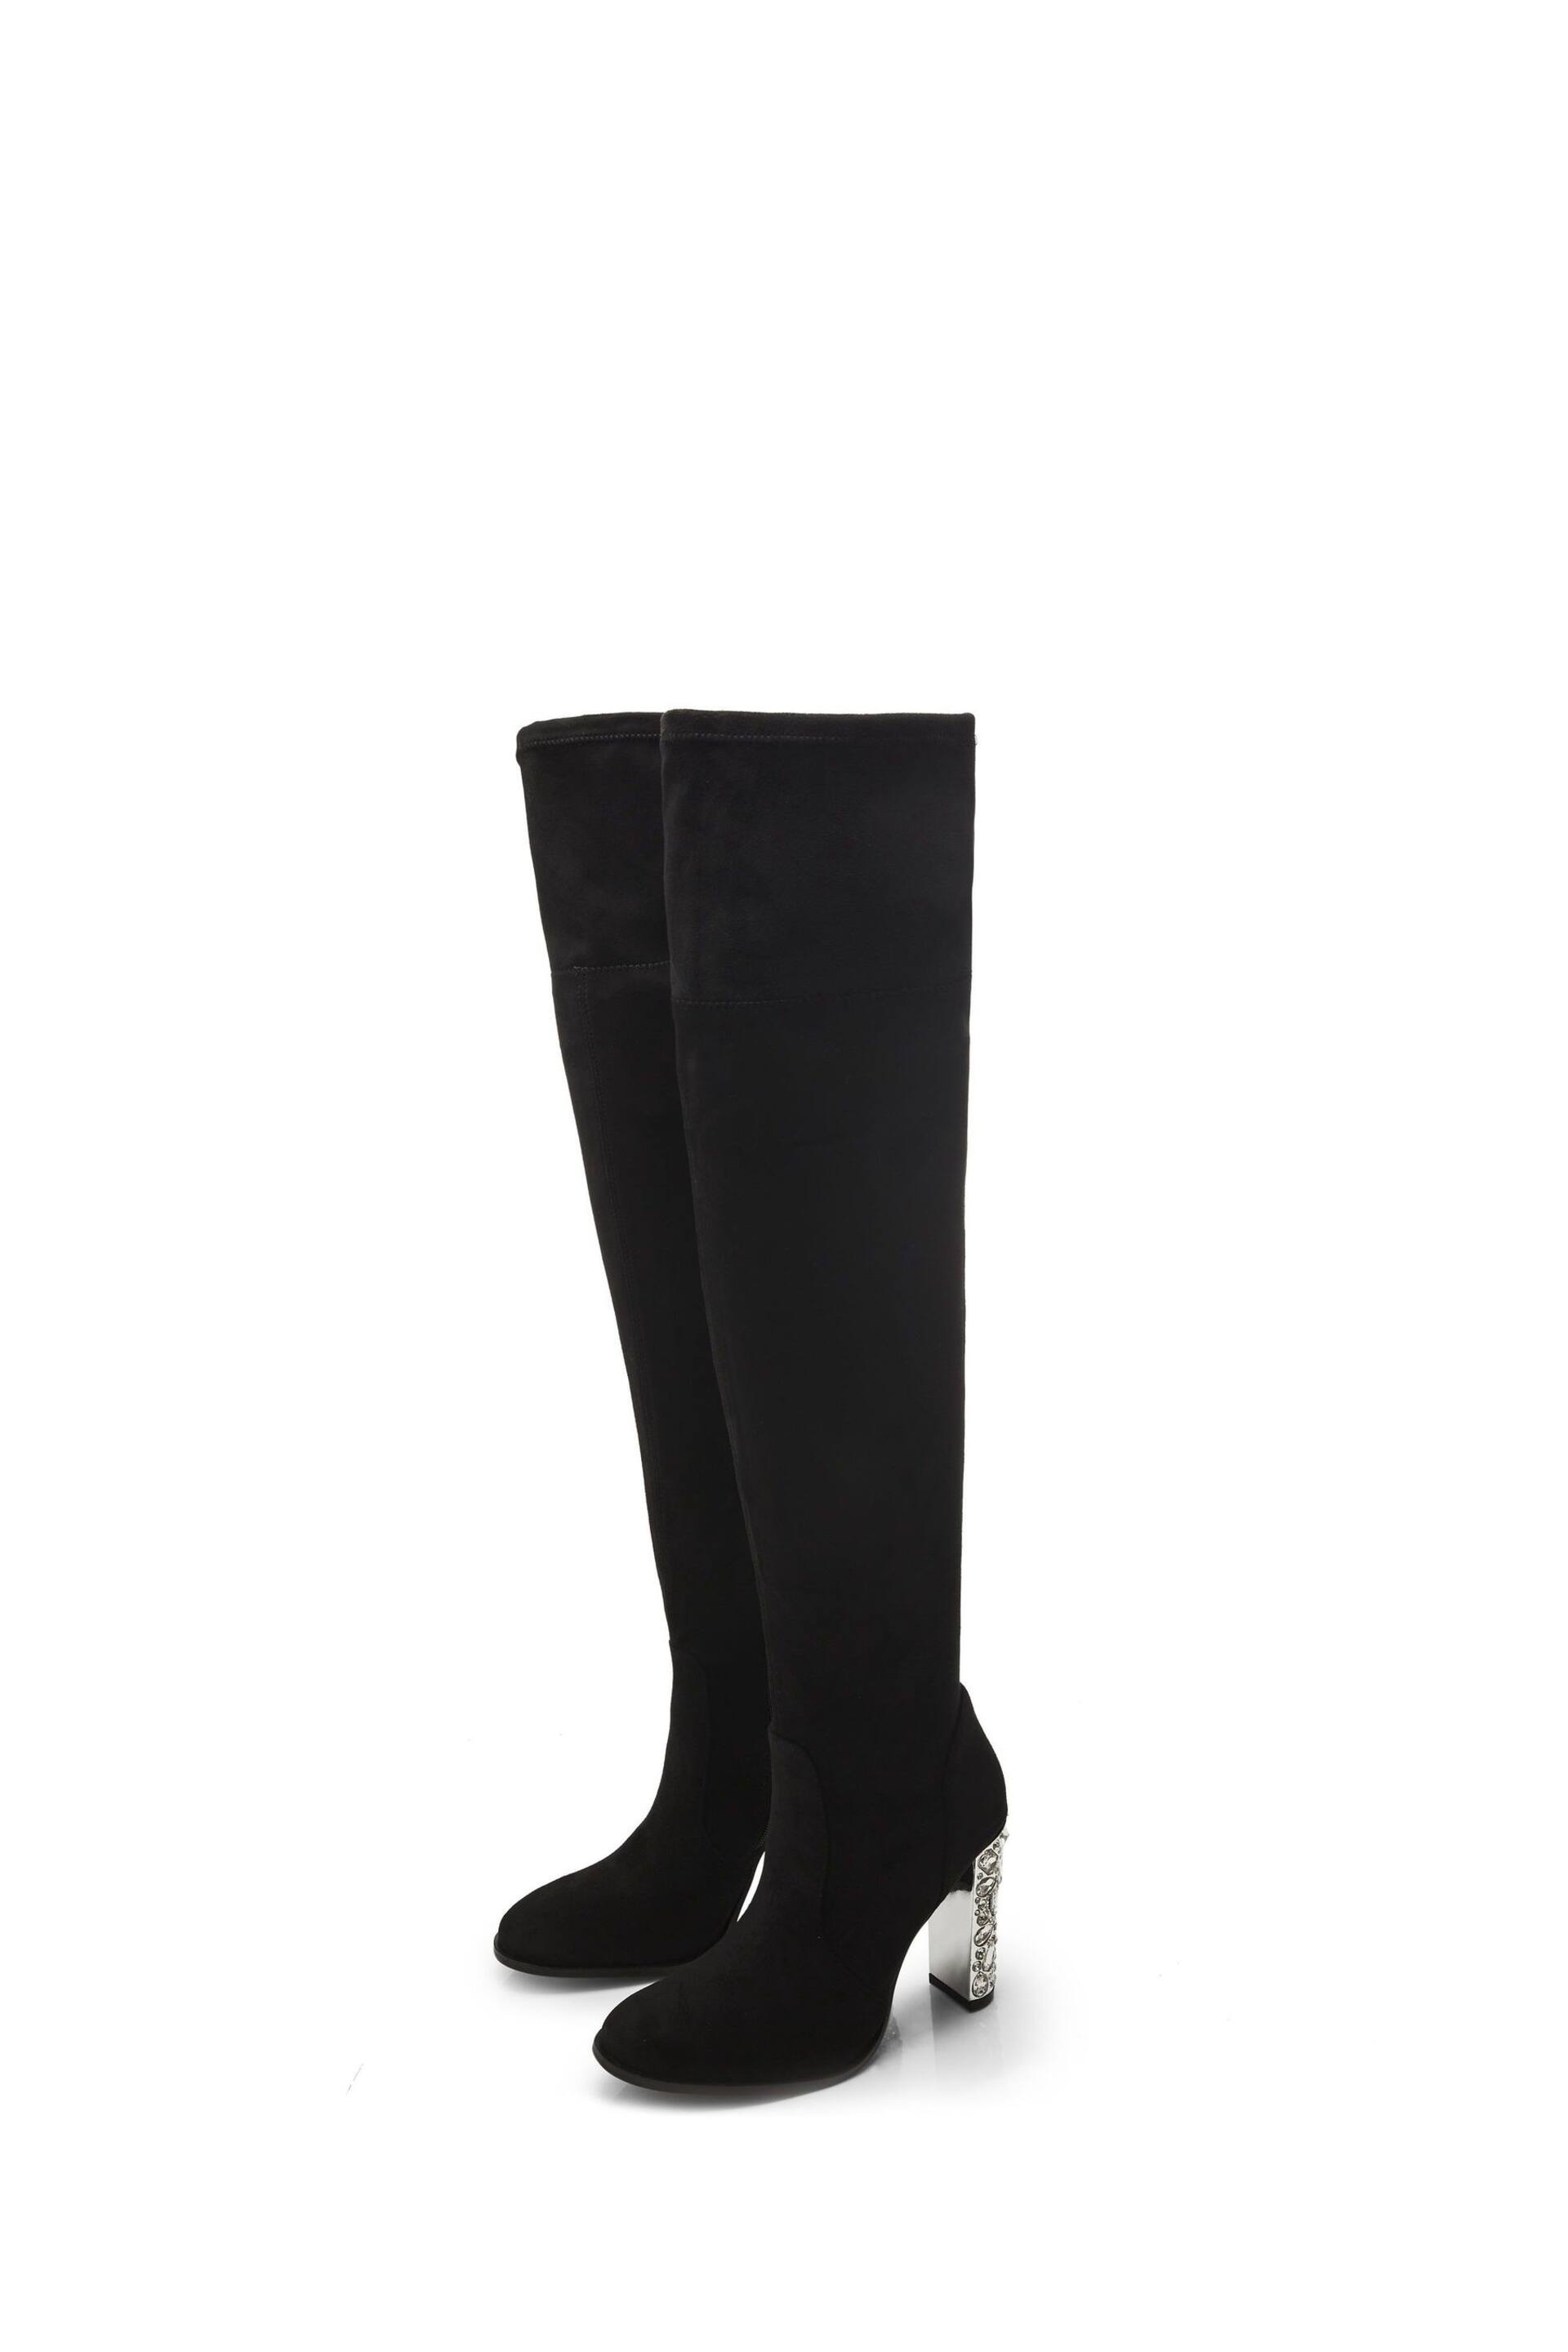 Moda in Pelle Zamaria Over Knee Microsude Black Boots With Feature Heel - Image 3 of 4